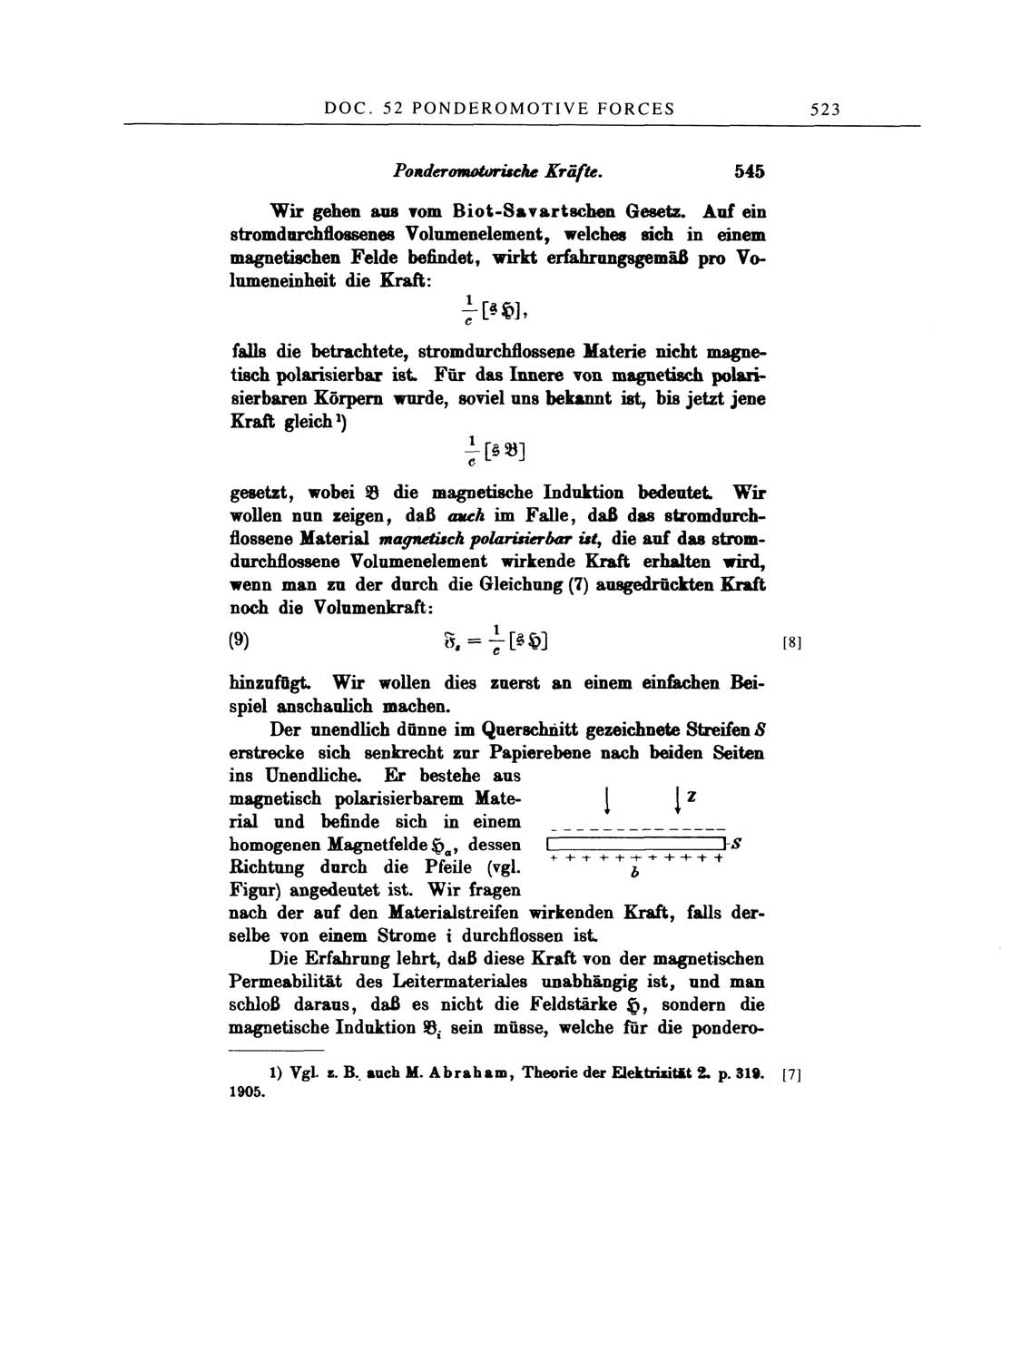 Volume 2: The Swiss Years: Writings, 1900-1909 page 523